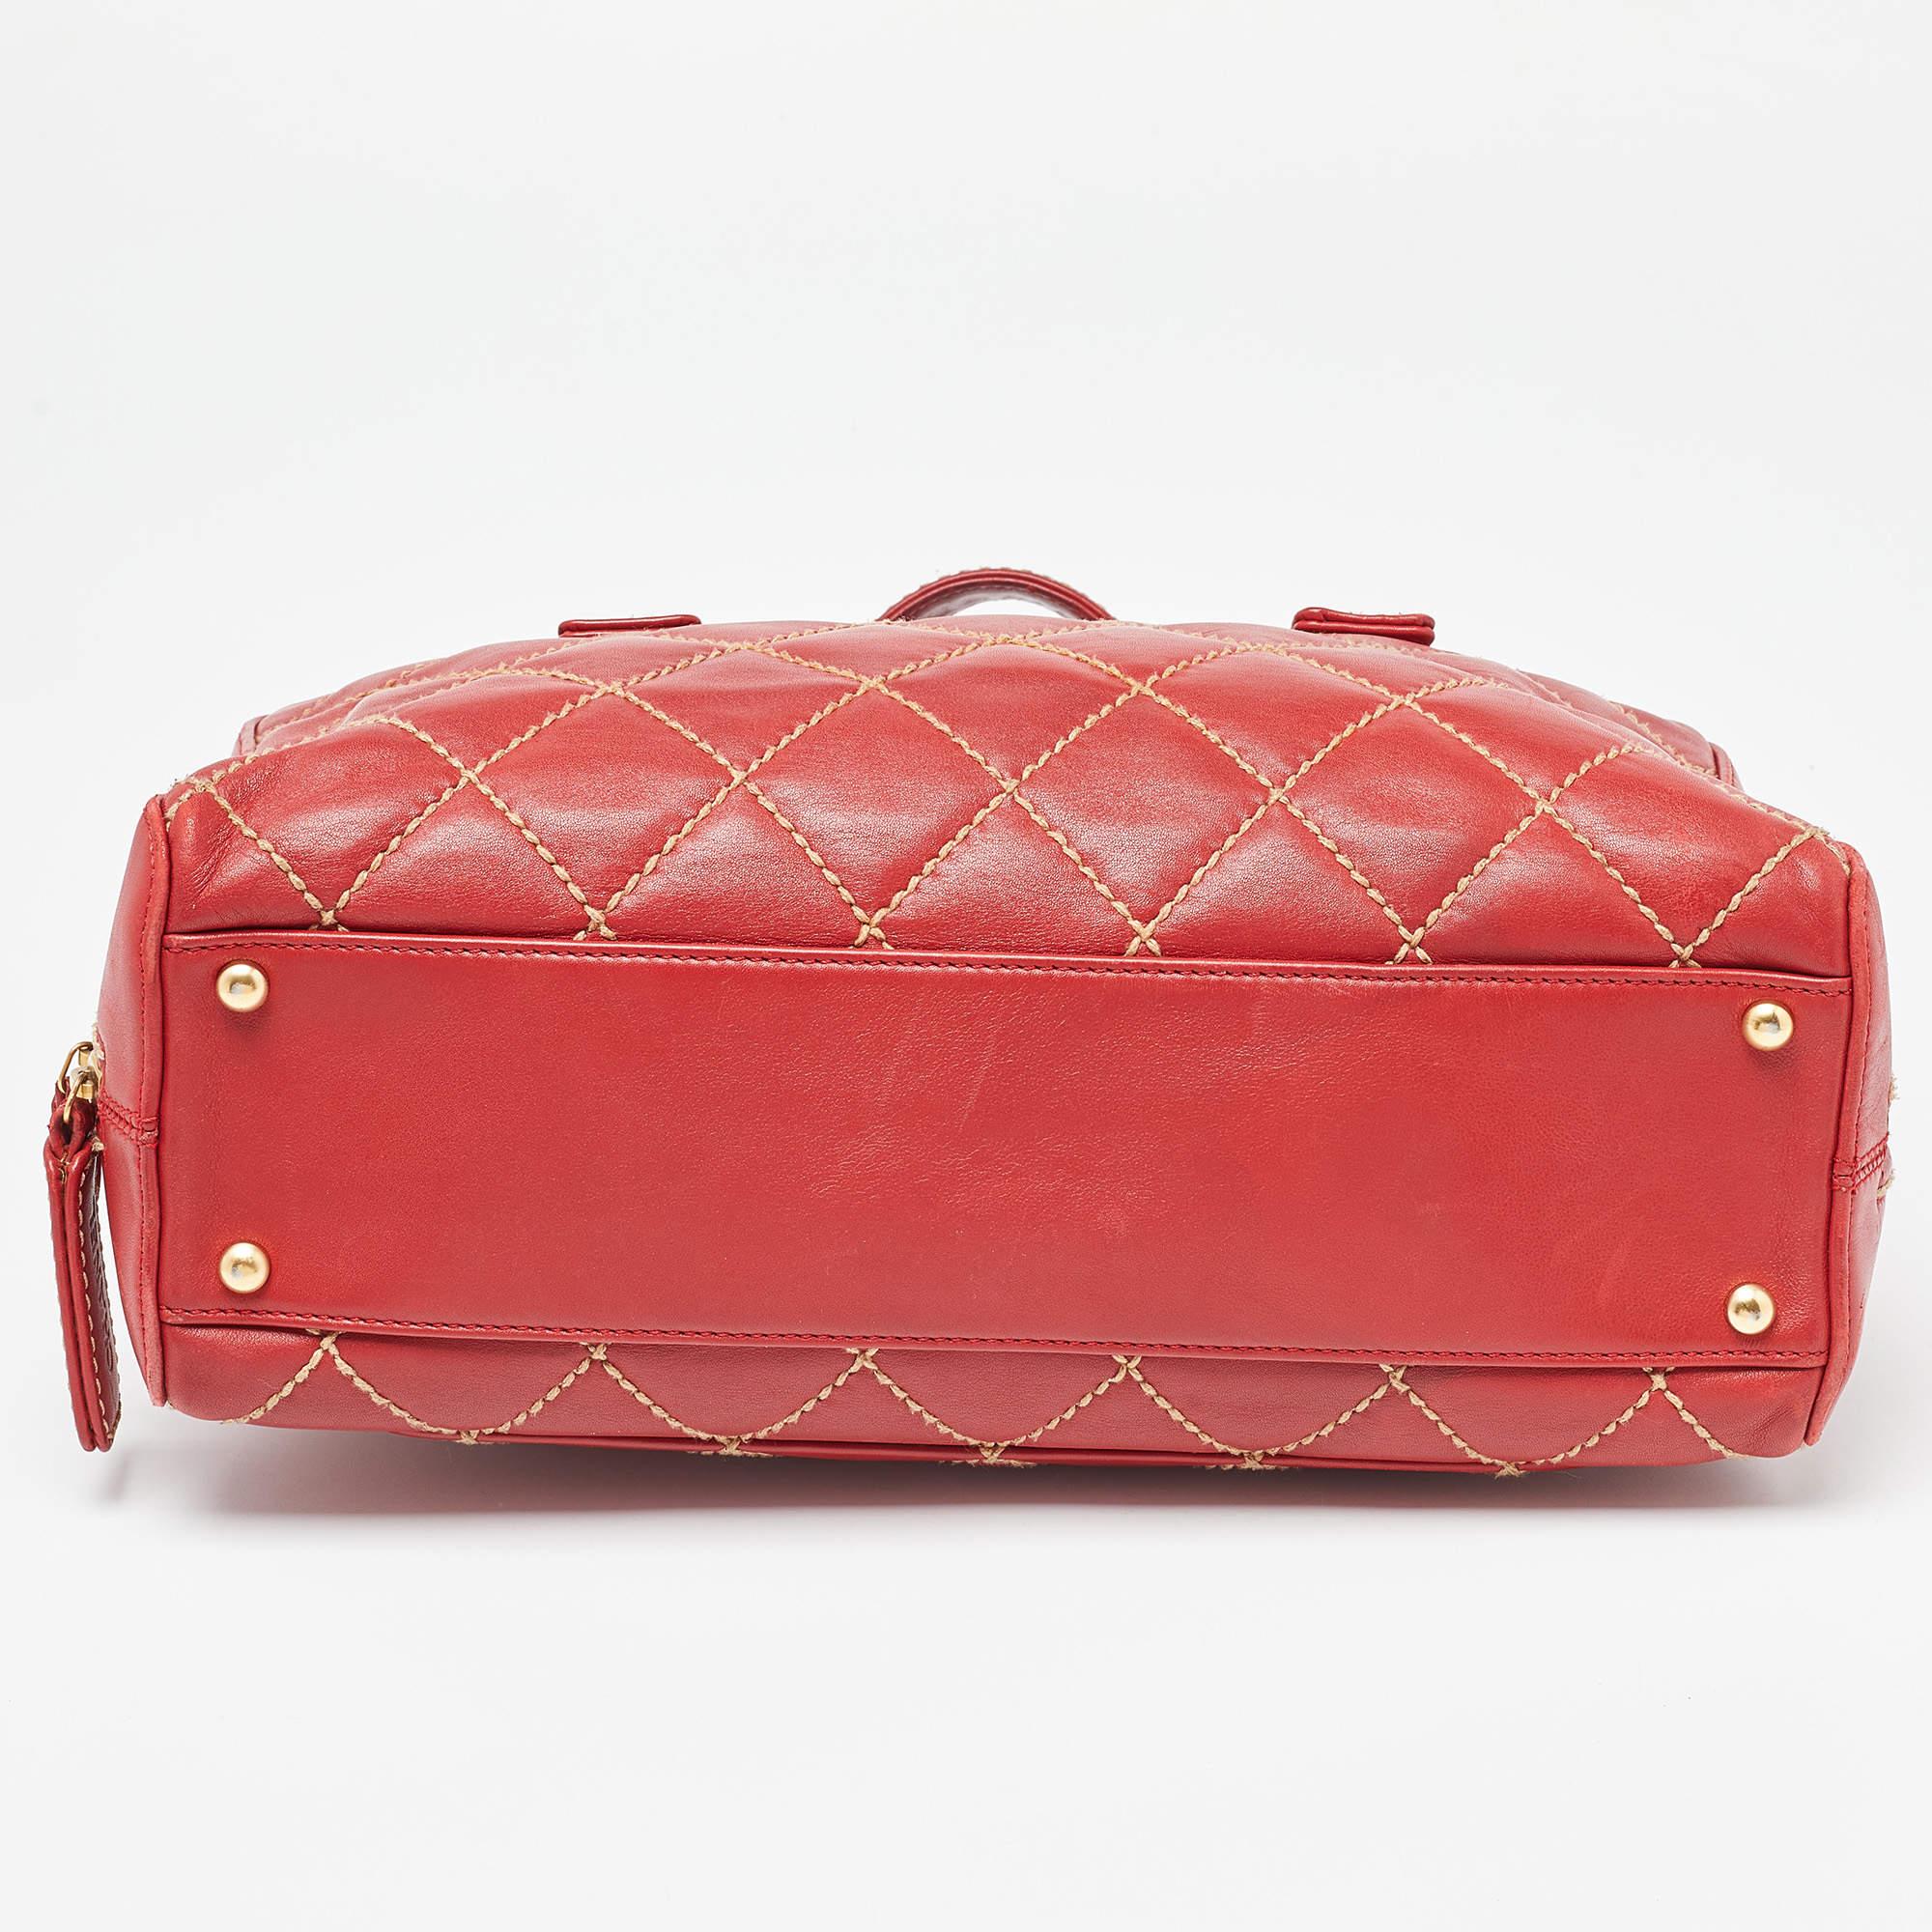 Chanel Red Quilted Leather Surpique Bowler Bag For Sale 1